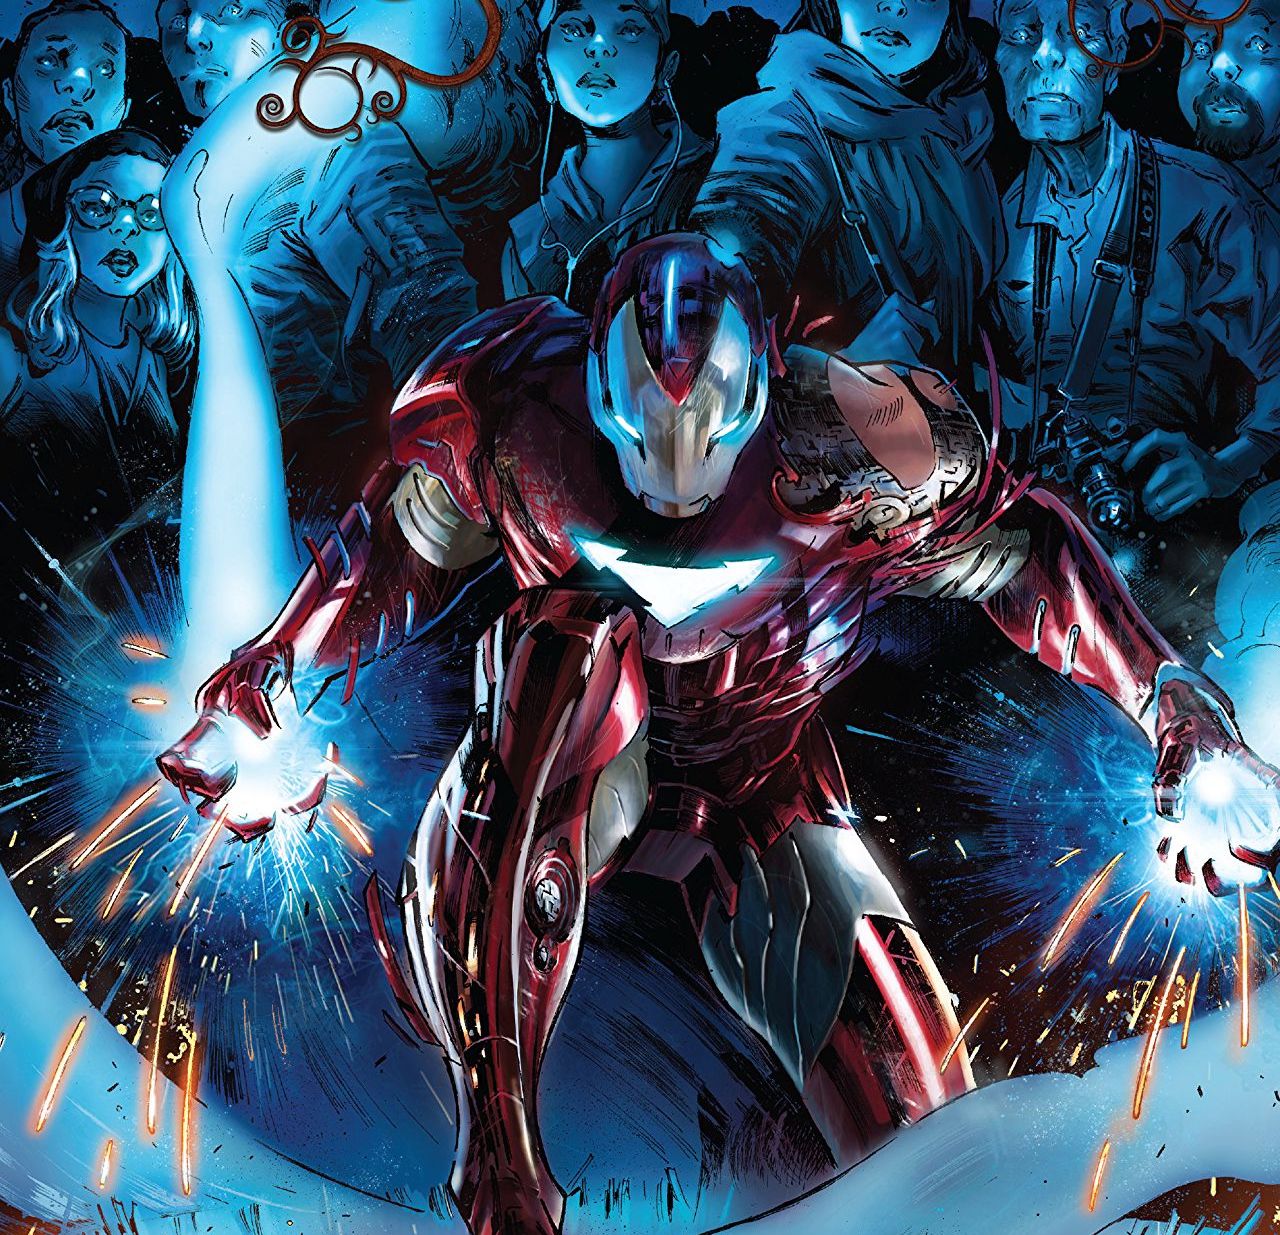 Tony Stark: Iron Man Vol. 3: War of the Realms Review